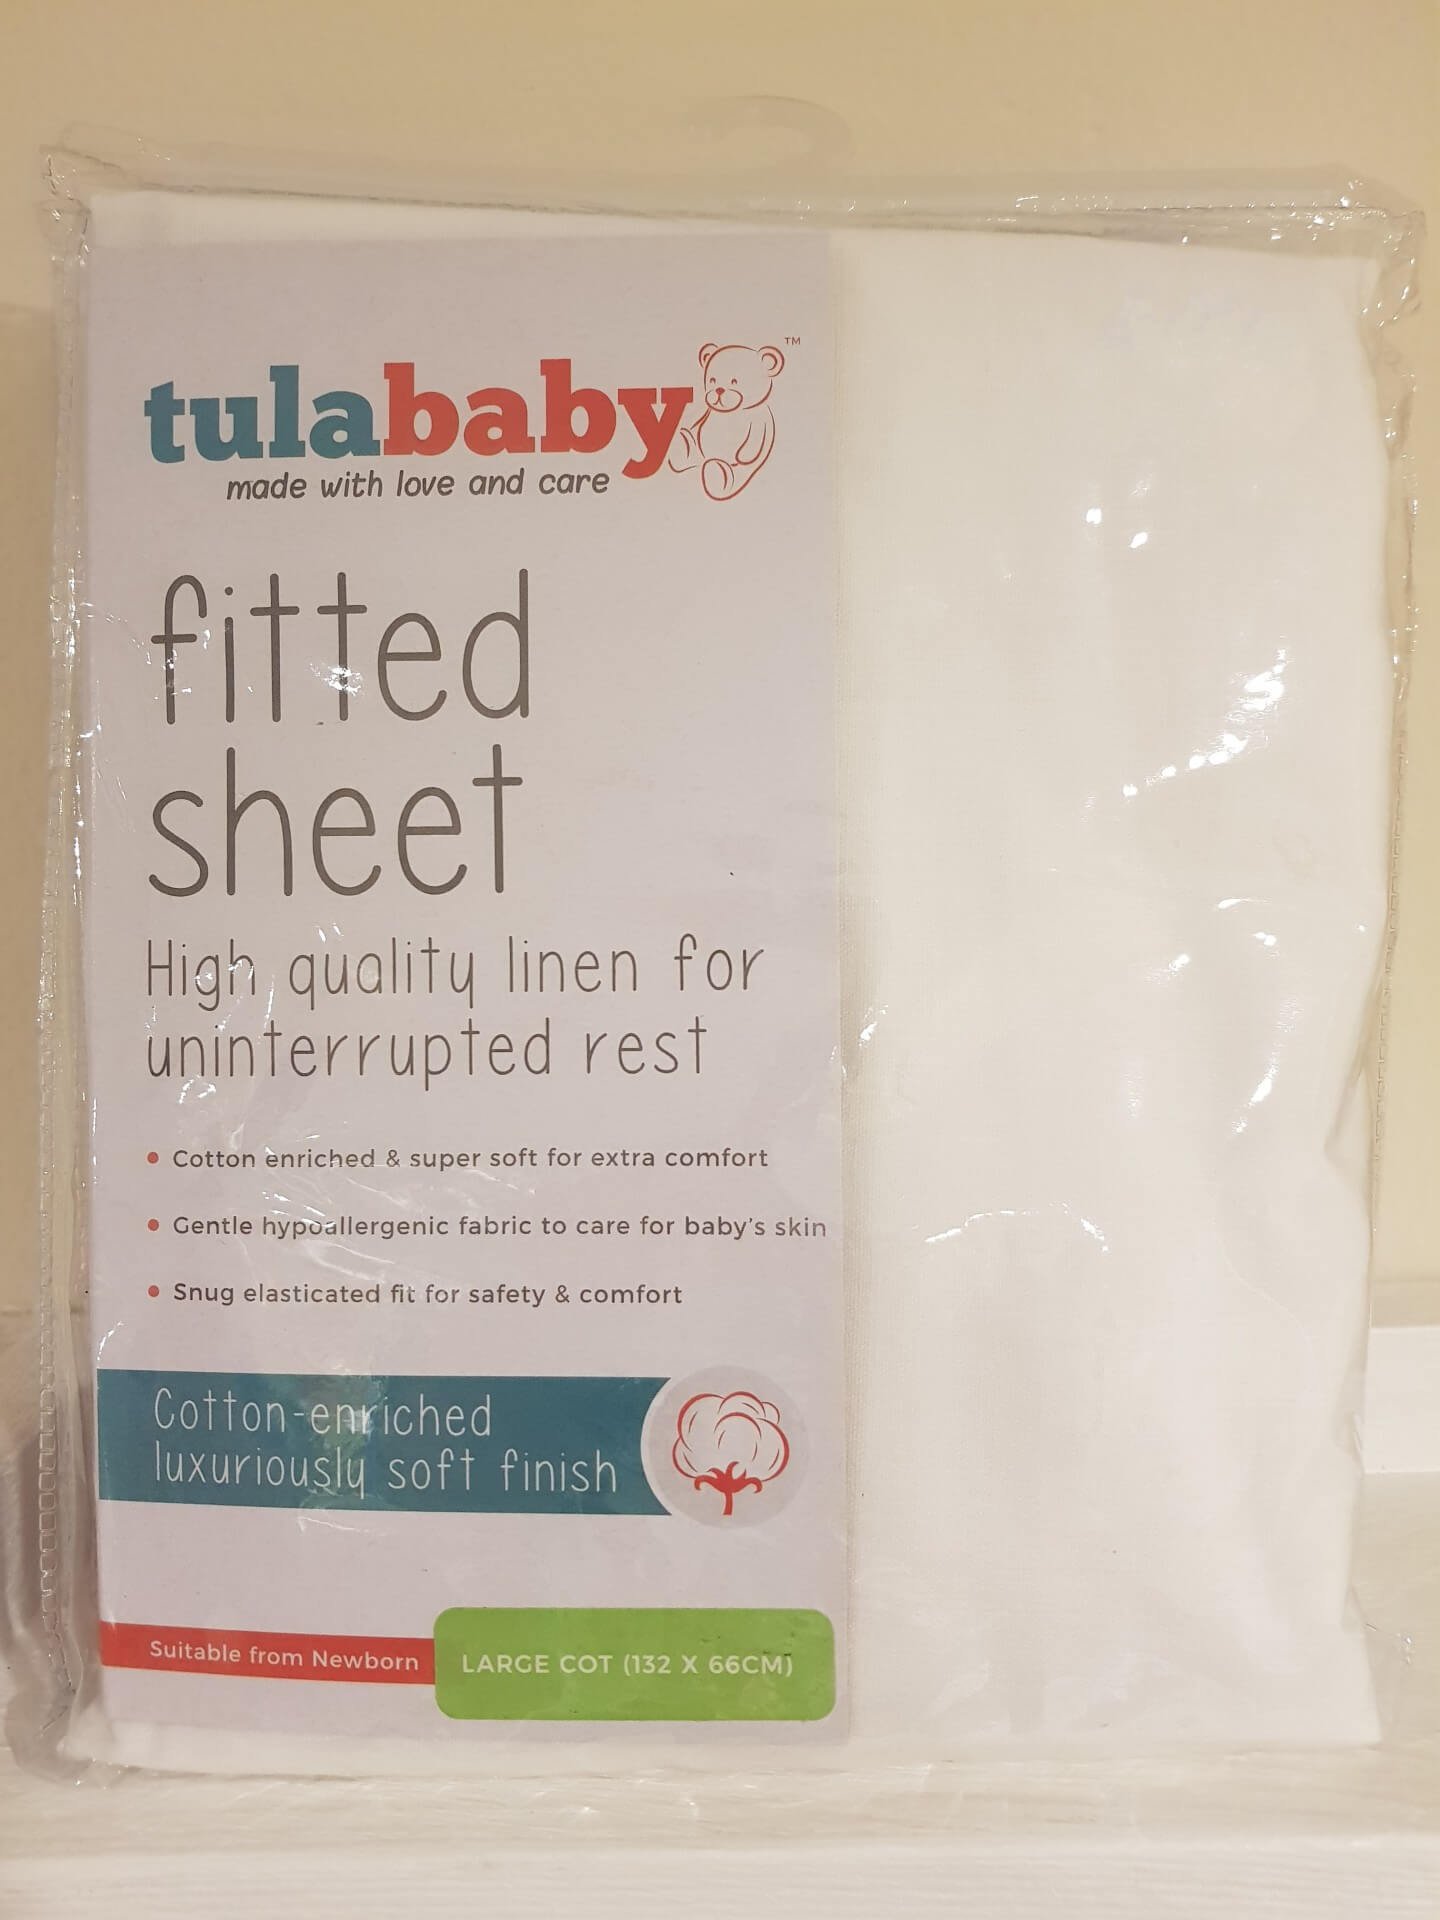 tula-baby-large-cot-fitted-sheet-white-babyhouse-shop